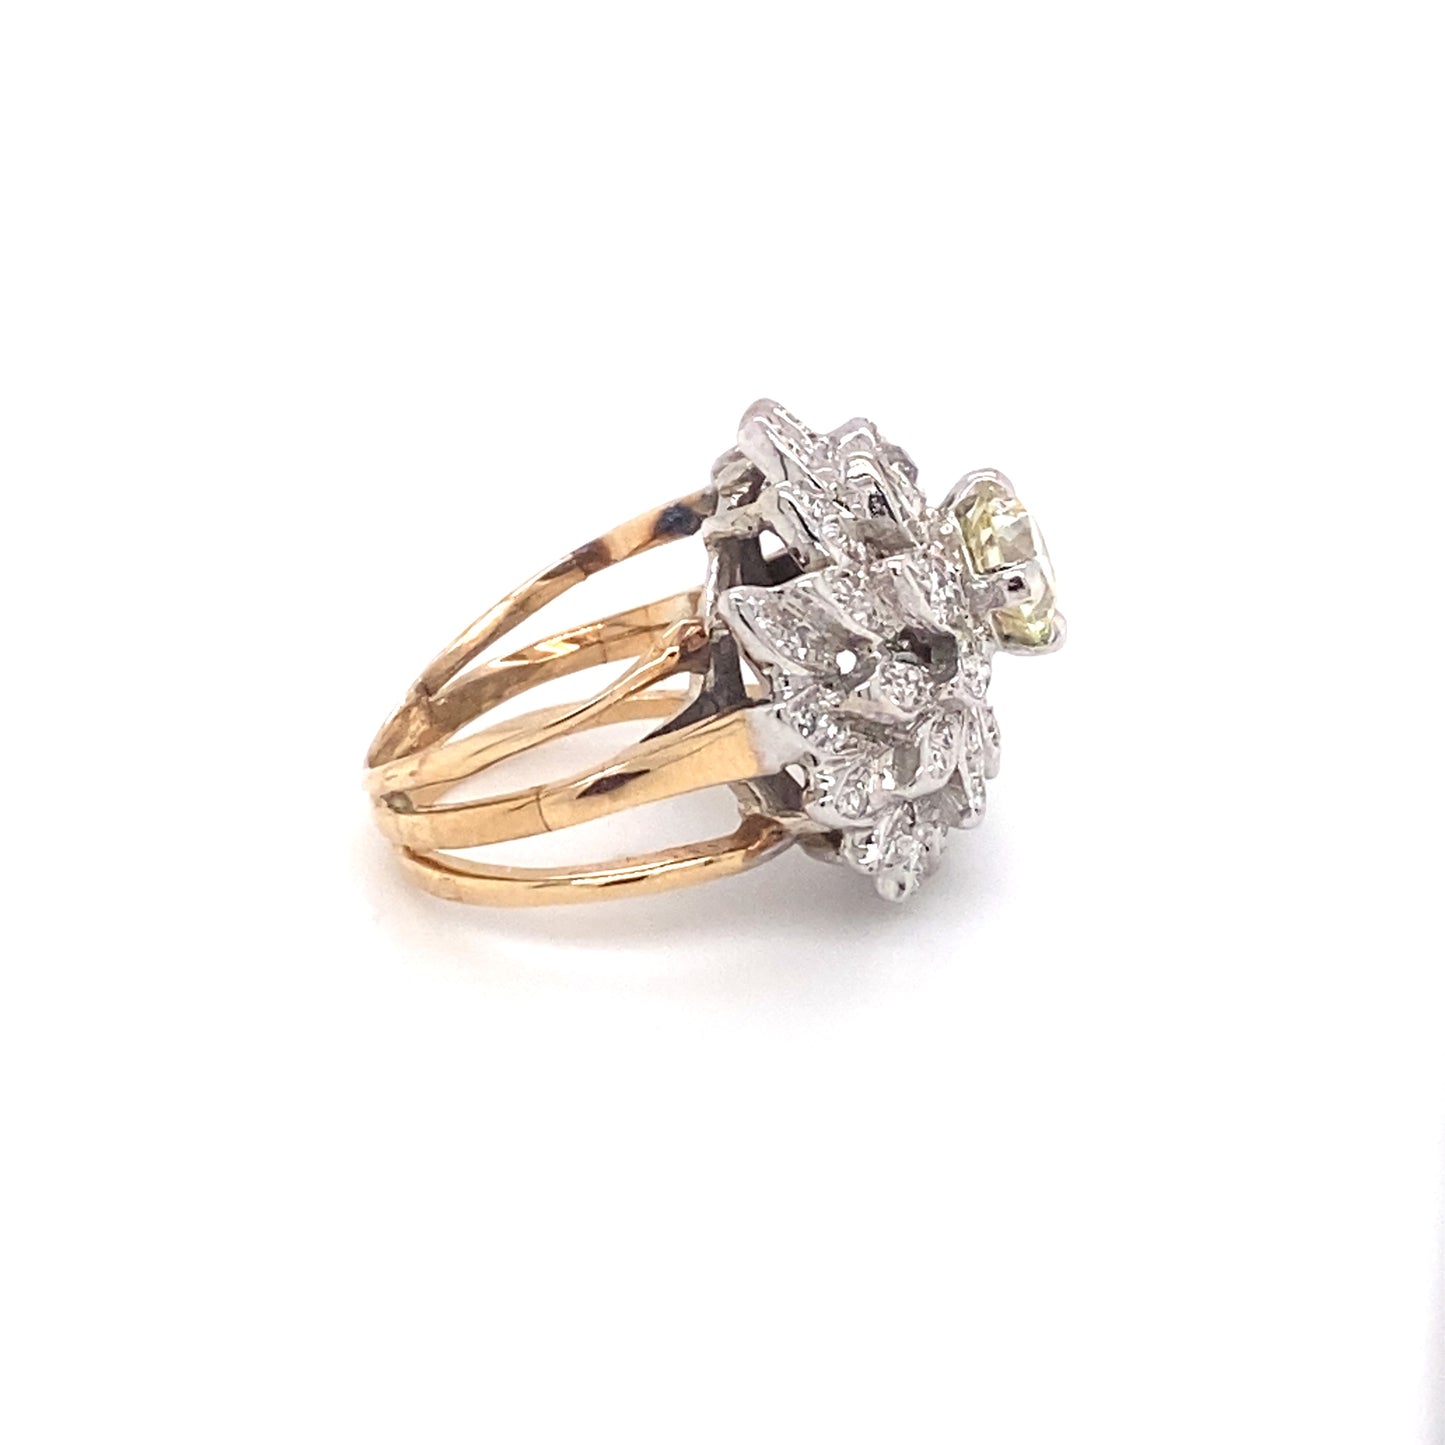 1940s Vintage 1.50ctw Diamond Waterfall Ring in 14K Two-Tone Gold